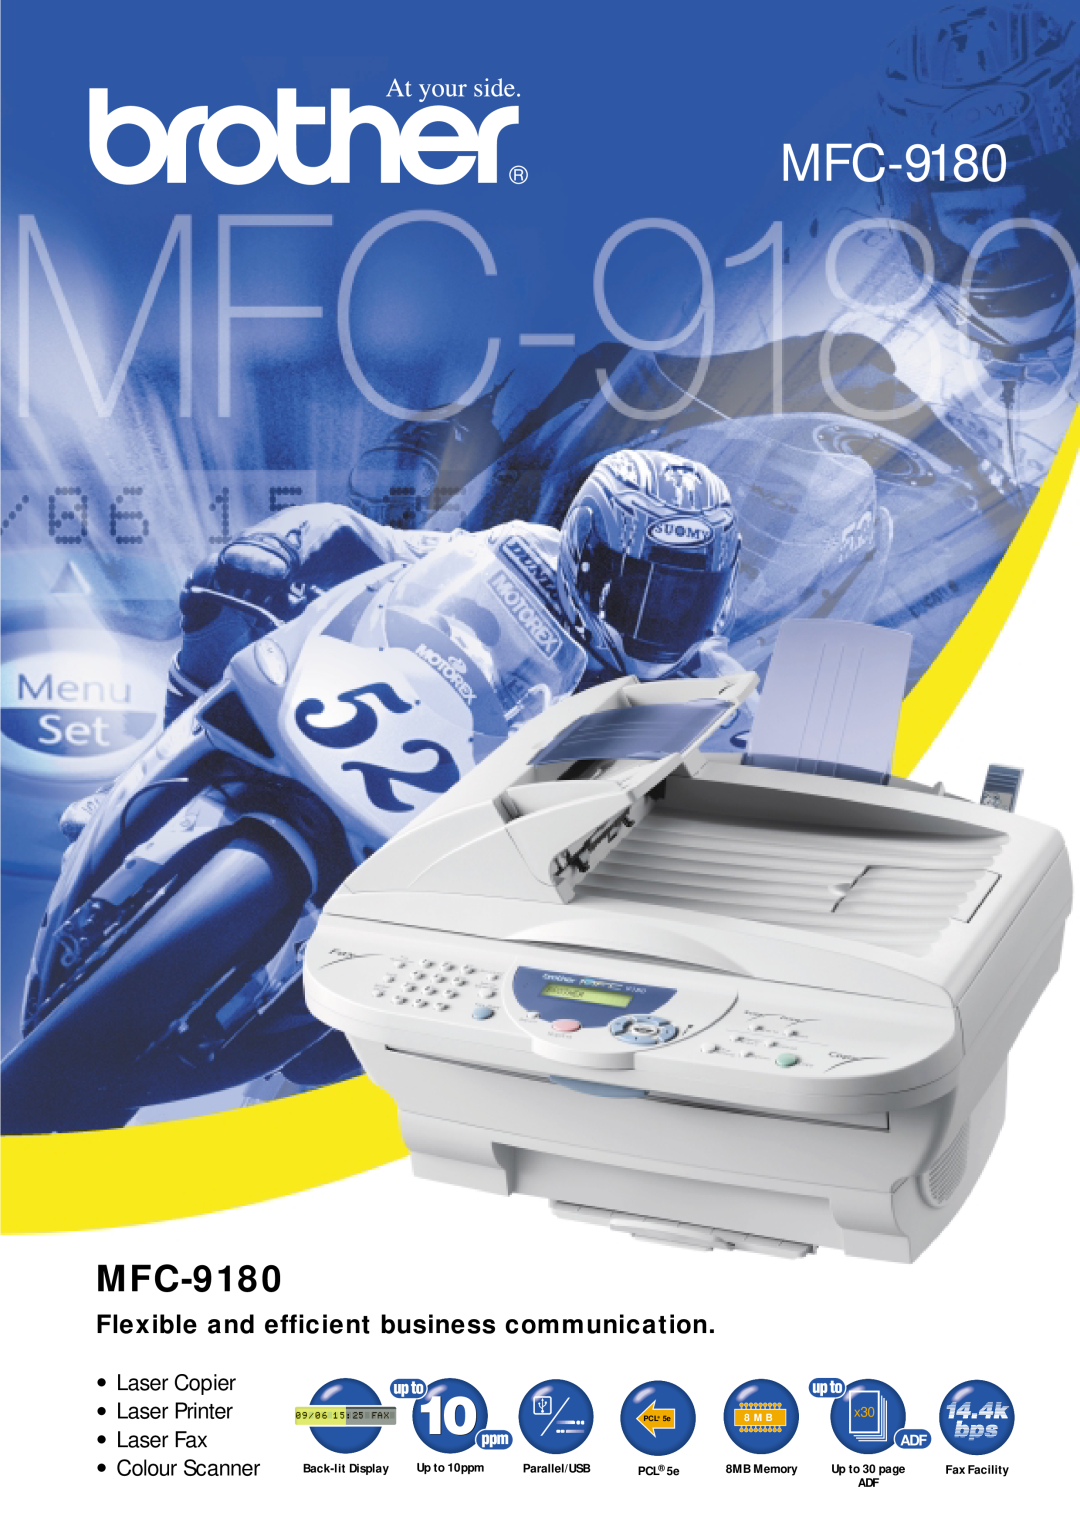 Brother MFC-9180 manual Flexible and efficient business communication, Laser Copier, Laser Printer, Laser Fax, Up to 10ppm 